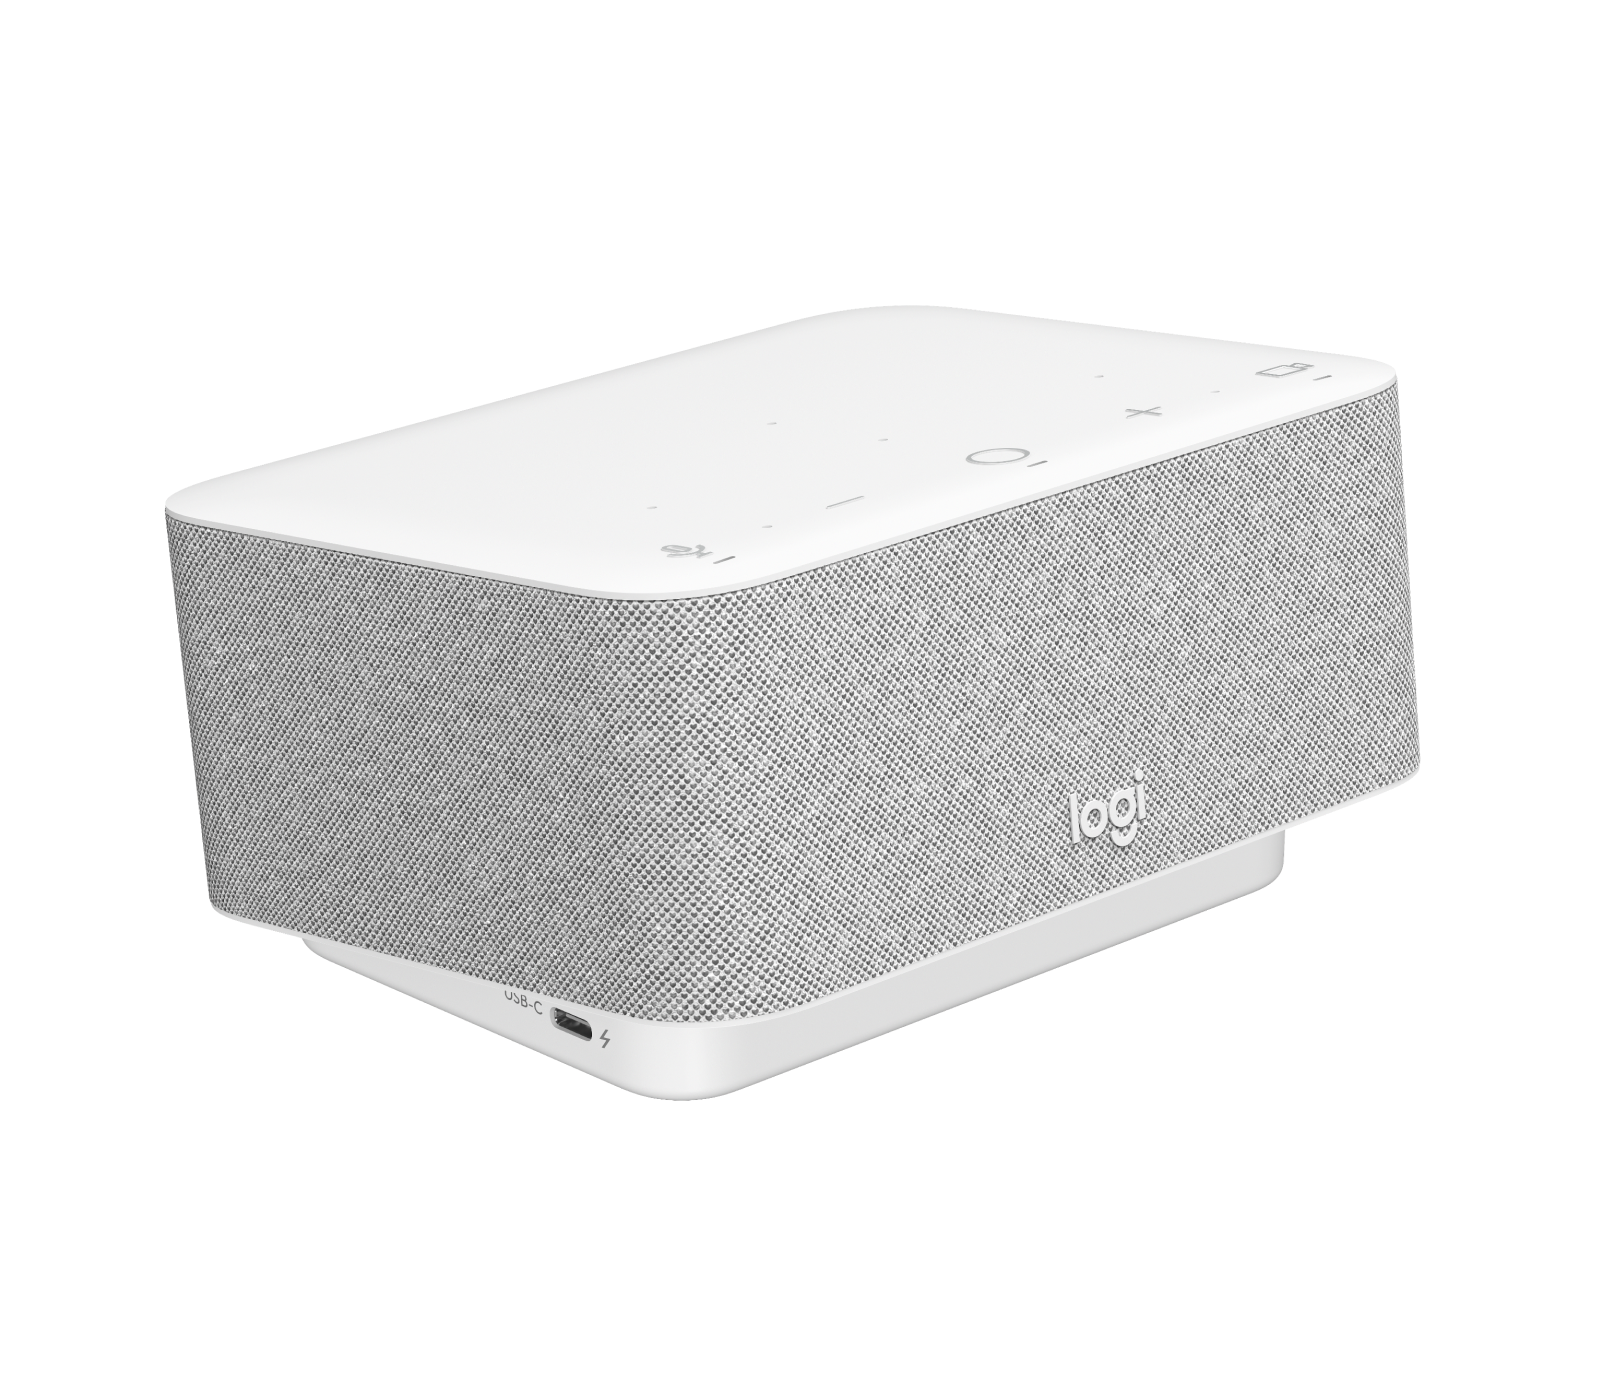 Image of Logi Dock All-in-one docking station with meeting controls and speakerphone. - Off-white Logi Dock (UC version)